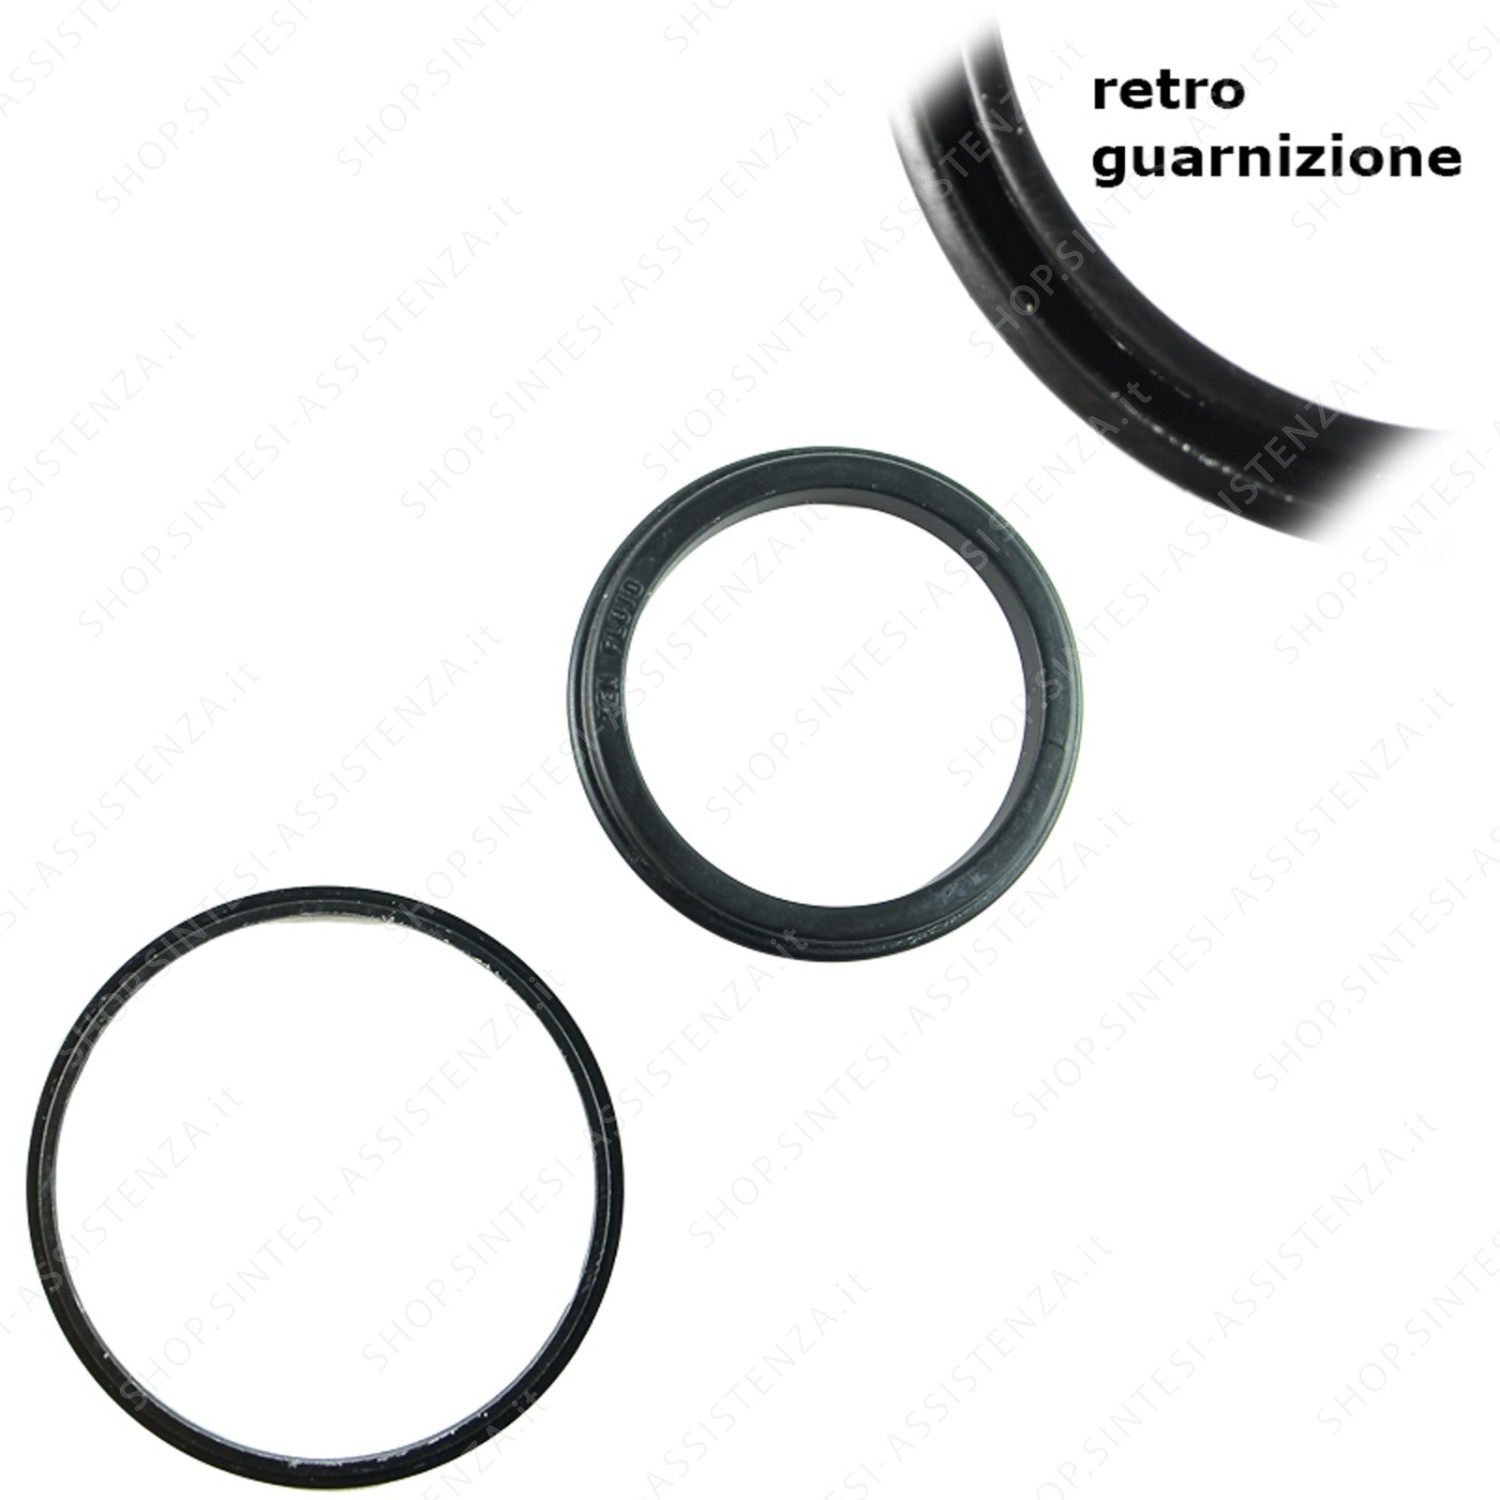 ANTI-FRICTION RING AND SEAL KIT OF FRANKE ADMIRAL TAP ROTATING BODY - 133.0063.743 FR